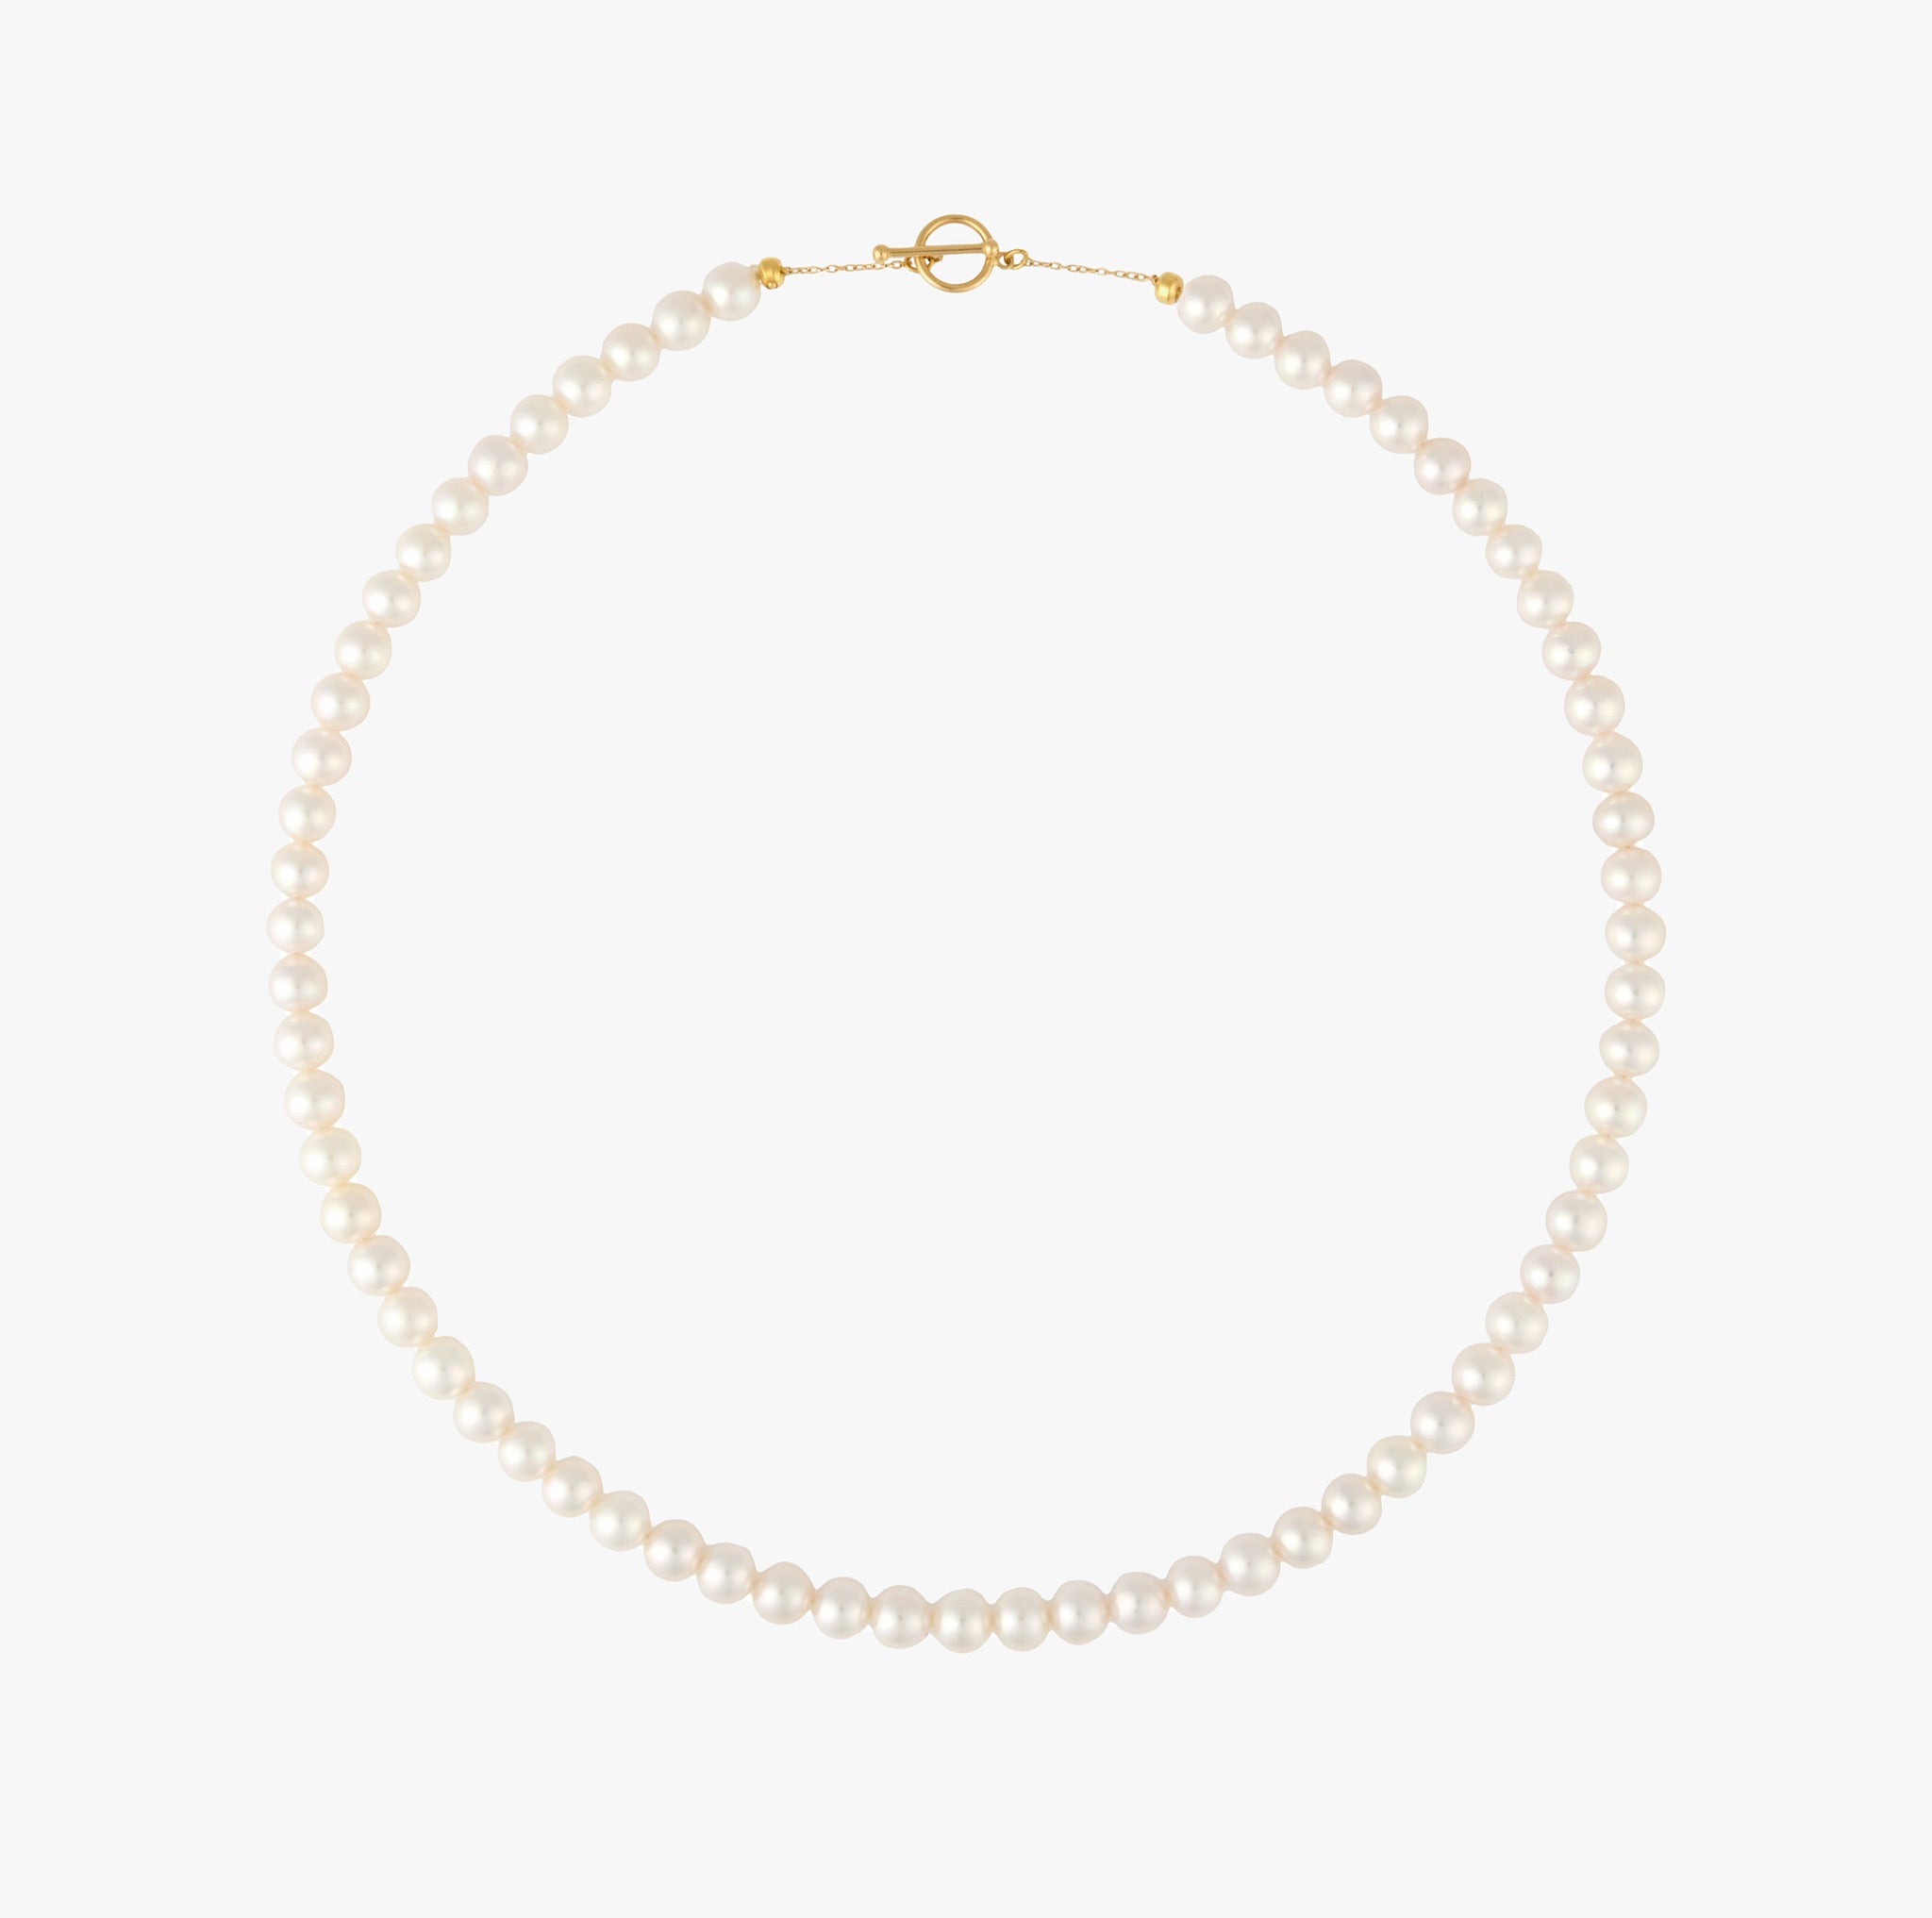 Showcase of Akoya Baby Pearl Classic Necklace on white background